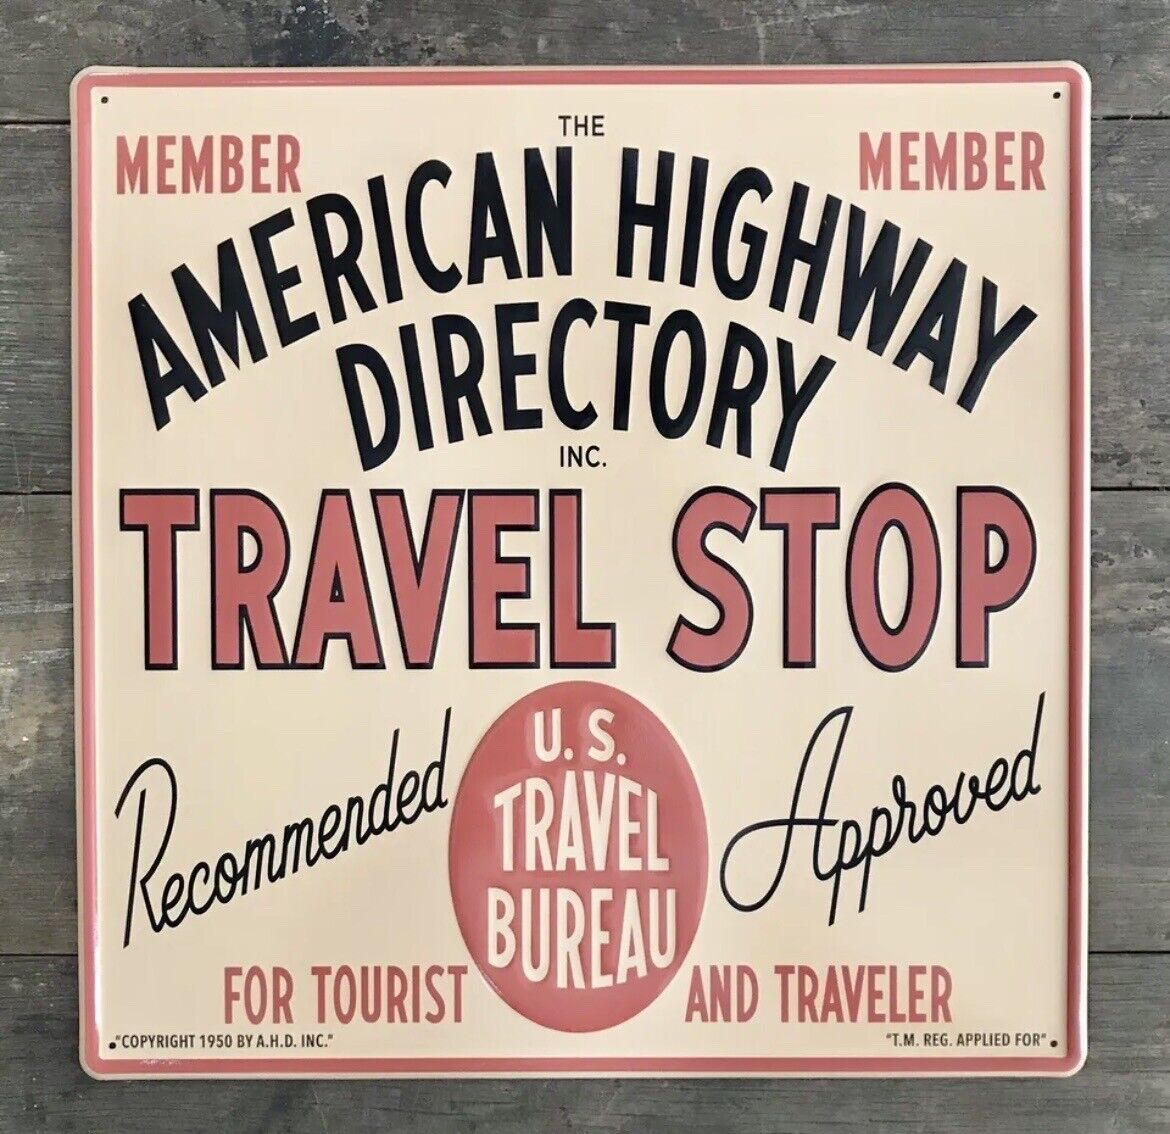 The AMERICAN HIGHWAY DIRECTORY Travel Stop Embossed Metal Sign, 17” x 17”